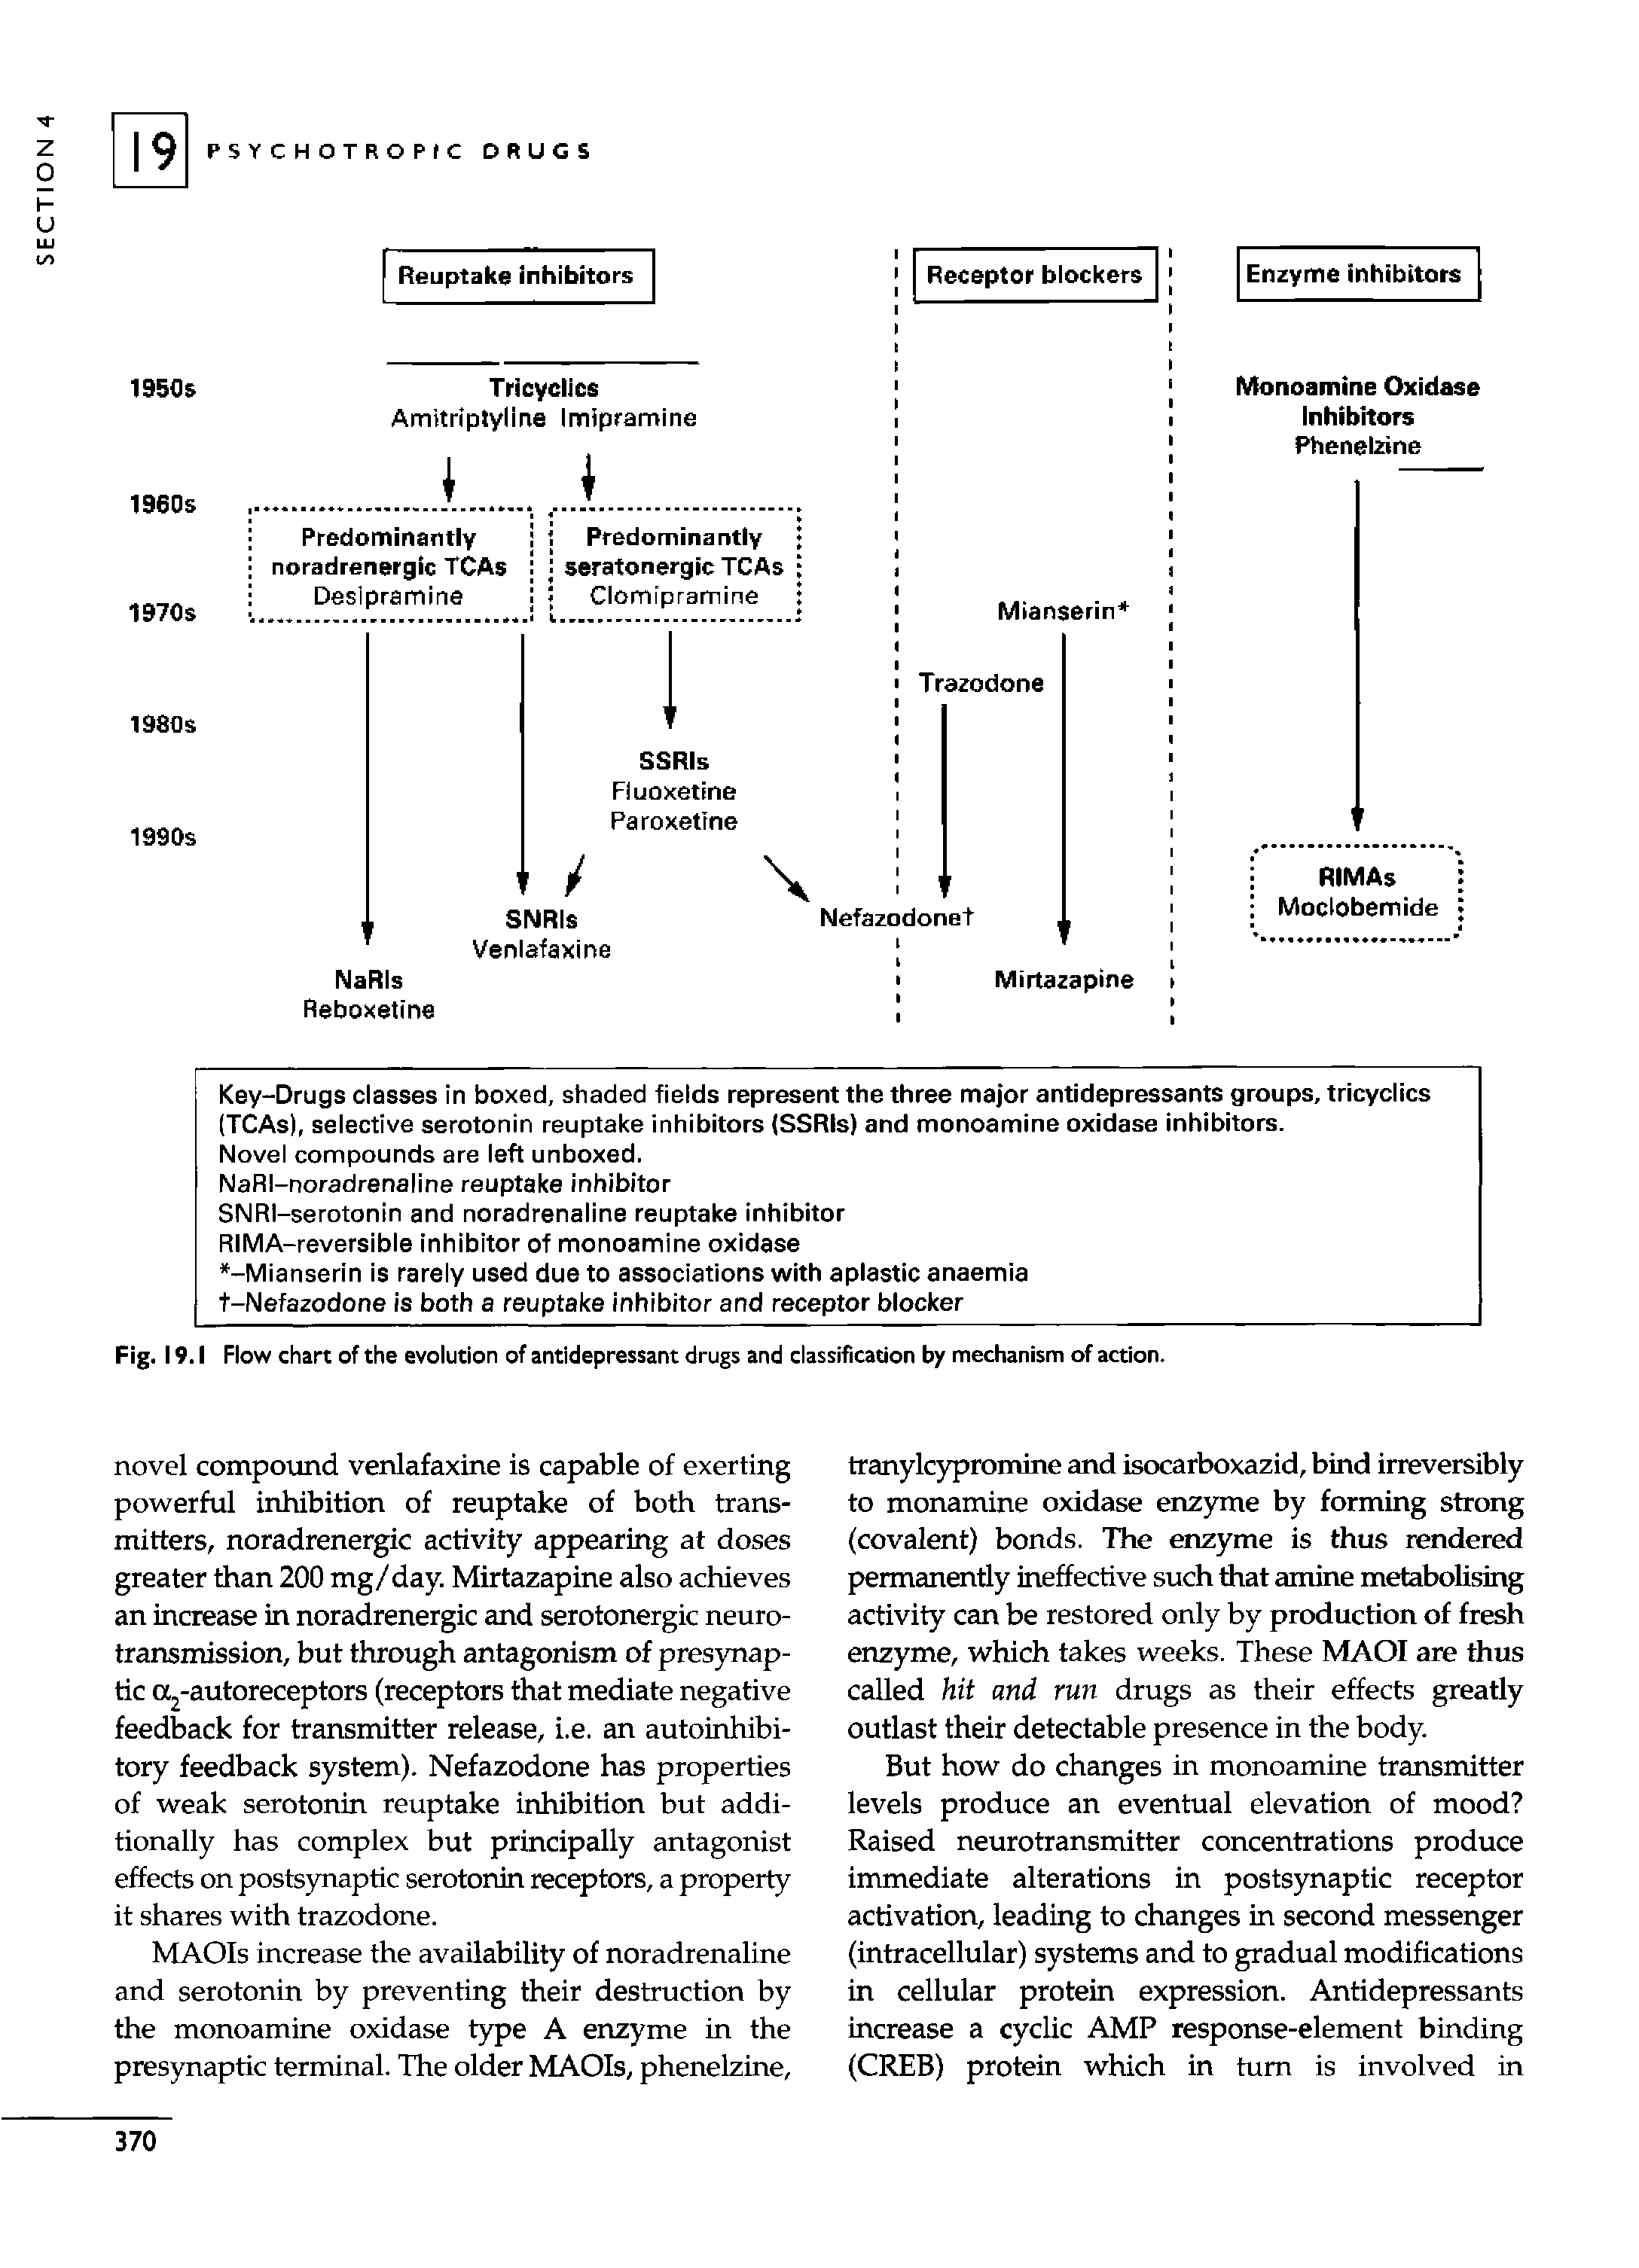 Fig. 19.1 Flow chart of the evolution of antidepressant drugs and classification by mechanism of action.